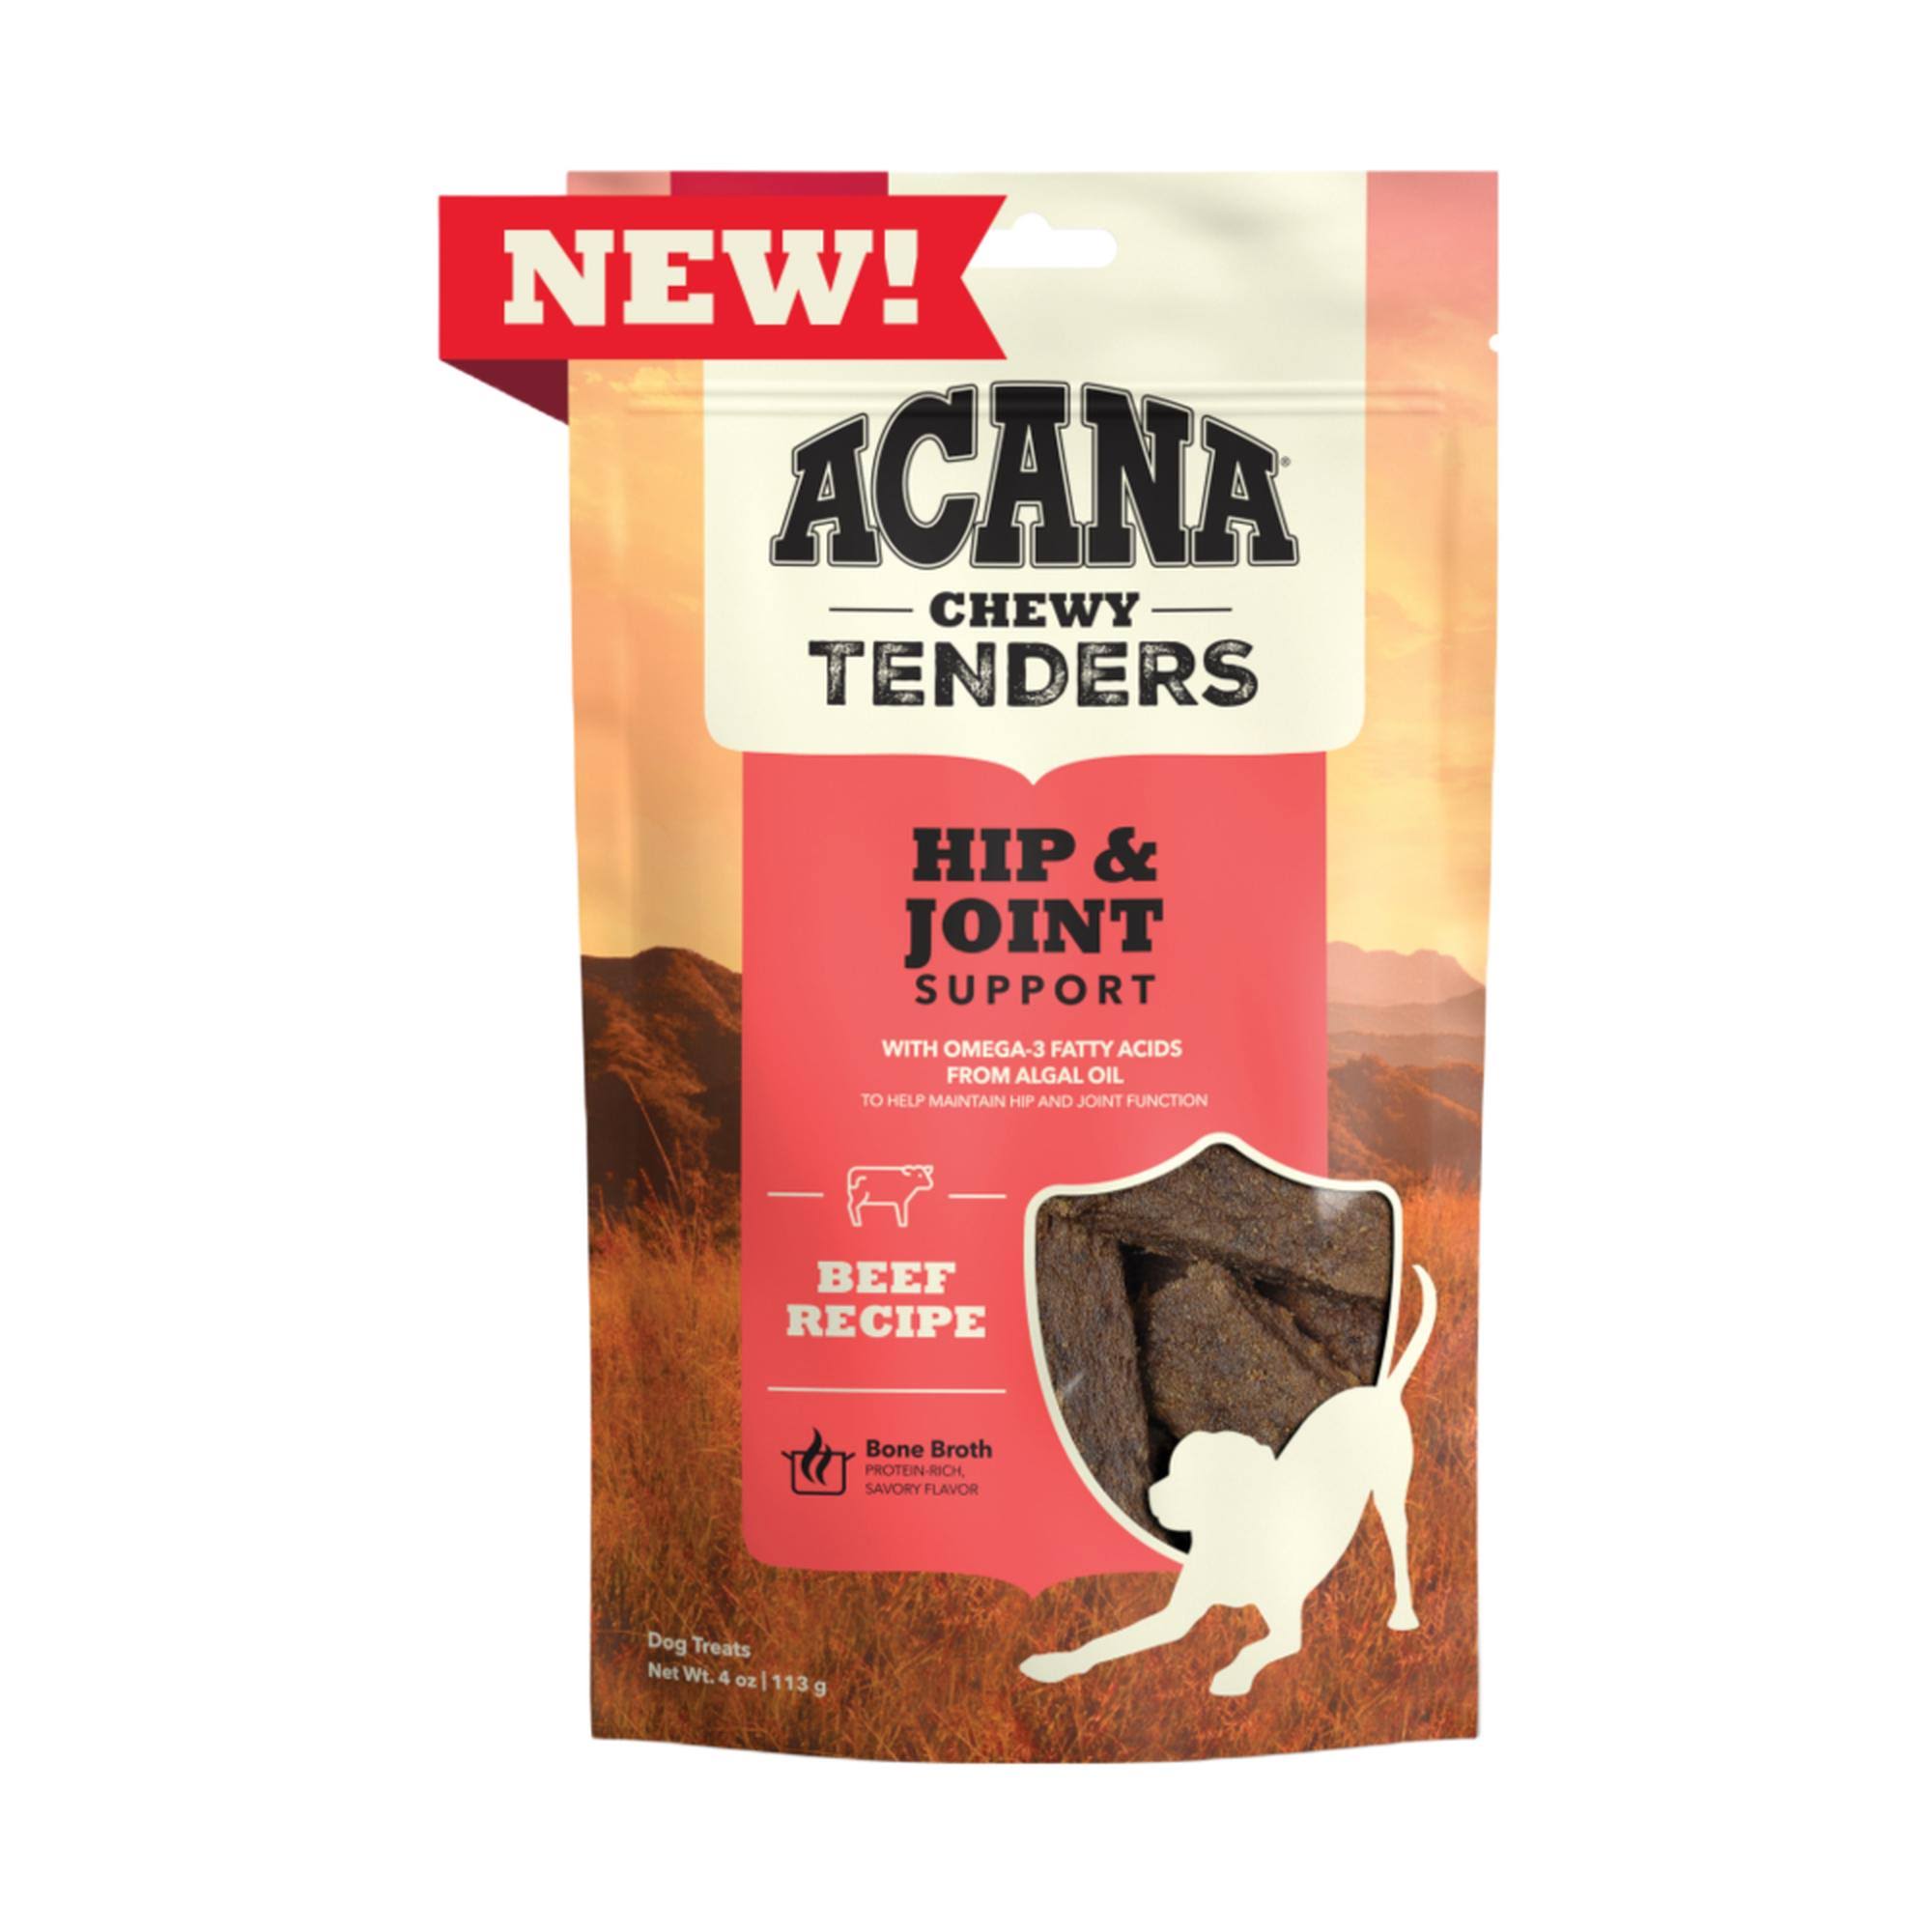 Acana Chewy Tenders Dog Treats Beef / Hip & Joint Support